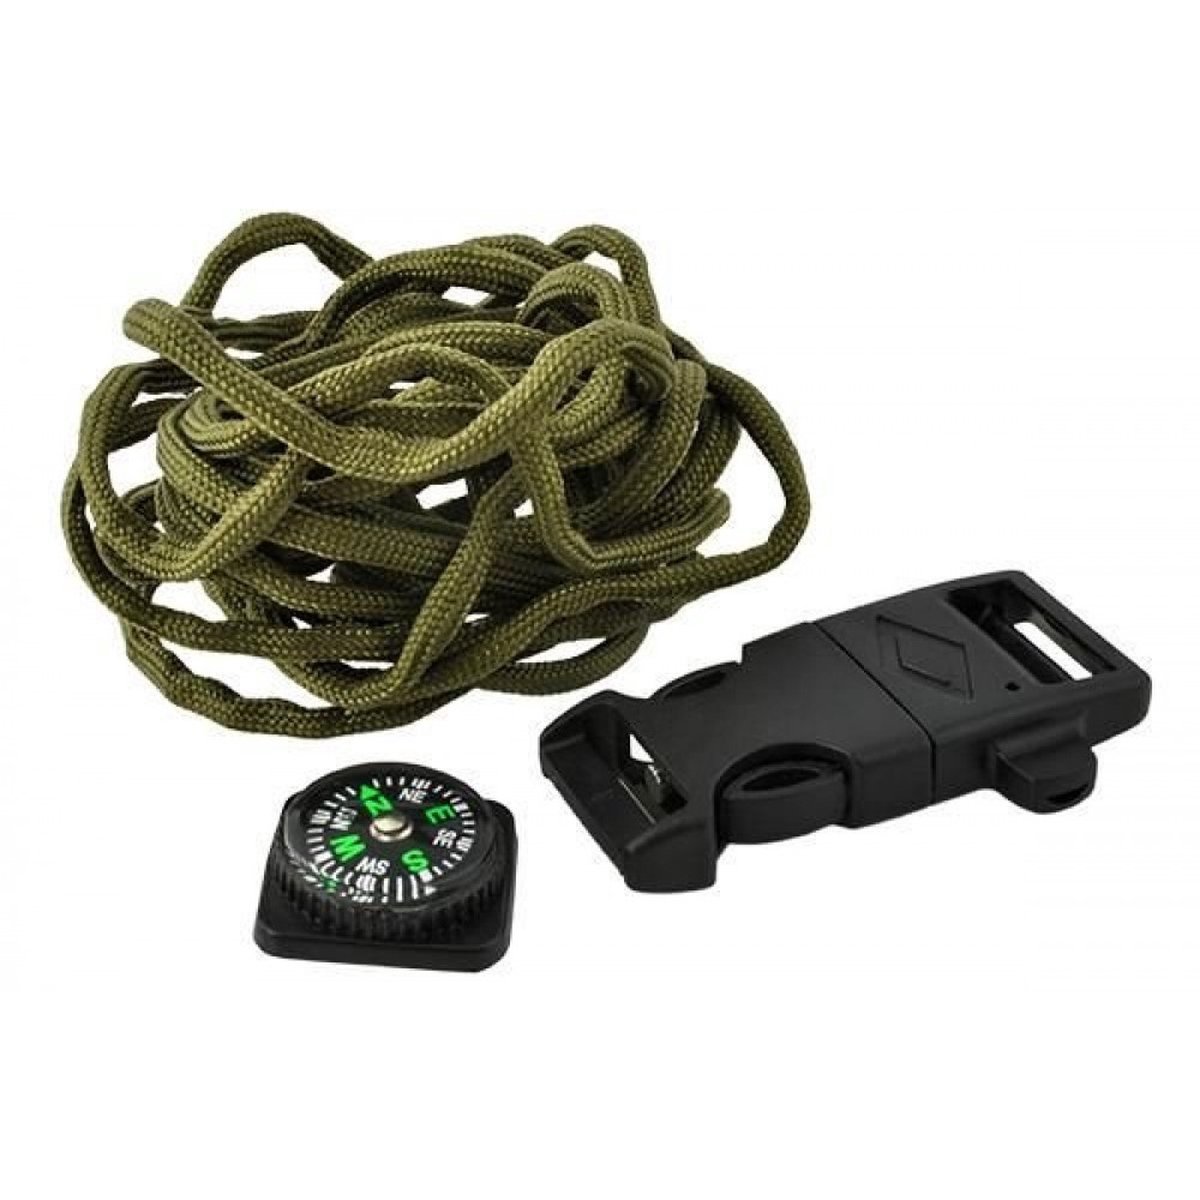 Paracord Armband Army Green 5in1 Tool Survival Out 